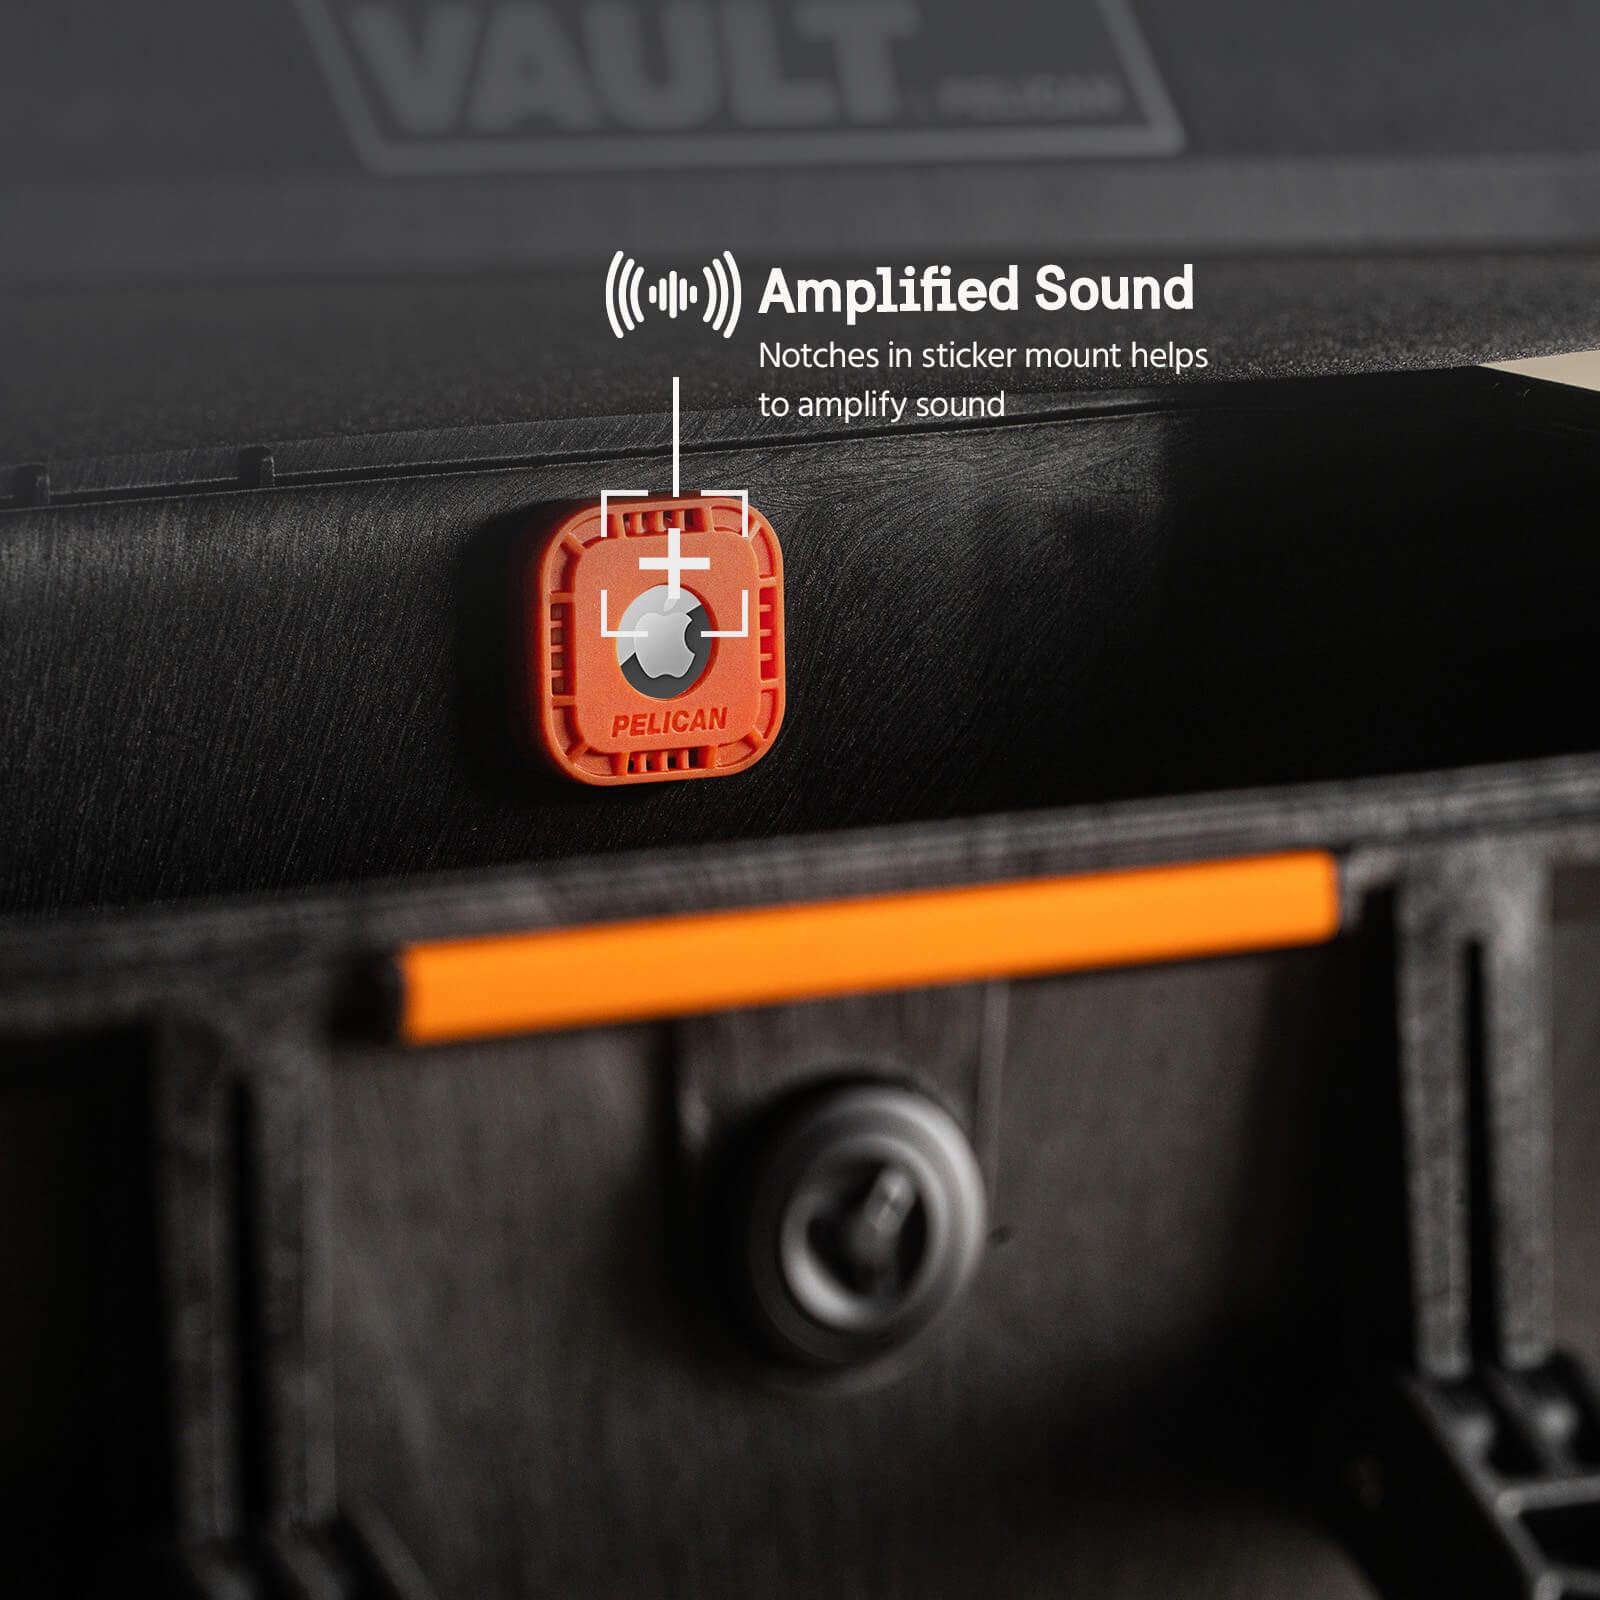 amplified sound notches in sticker mount helps to amplify sound. color::Orange